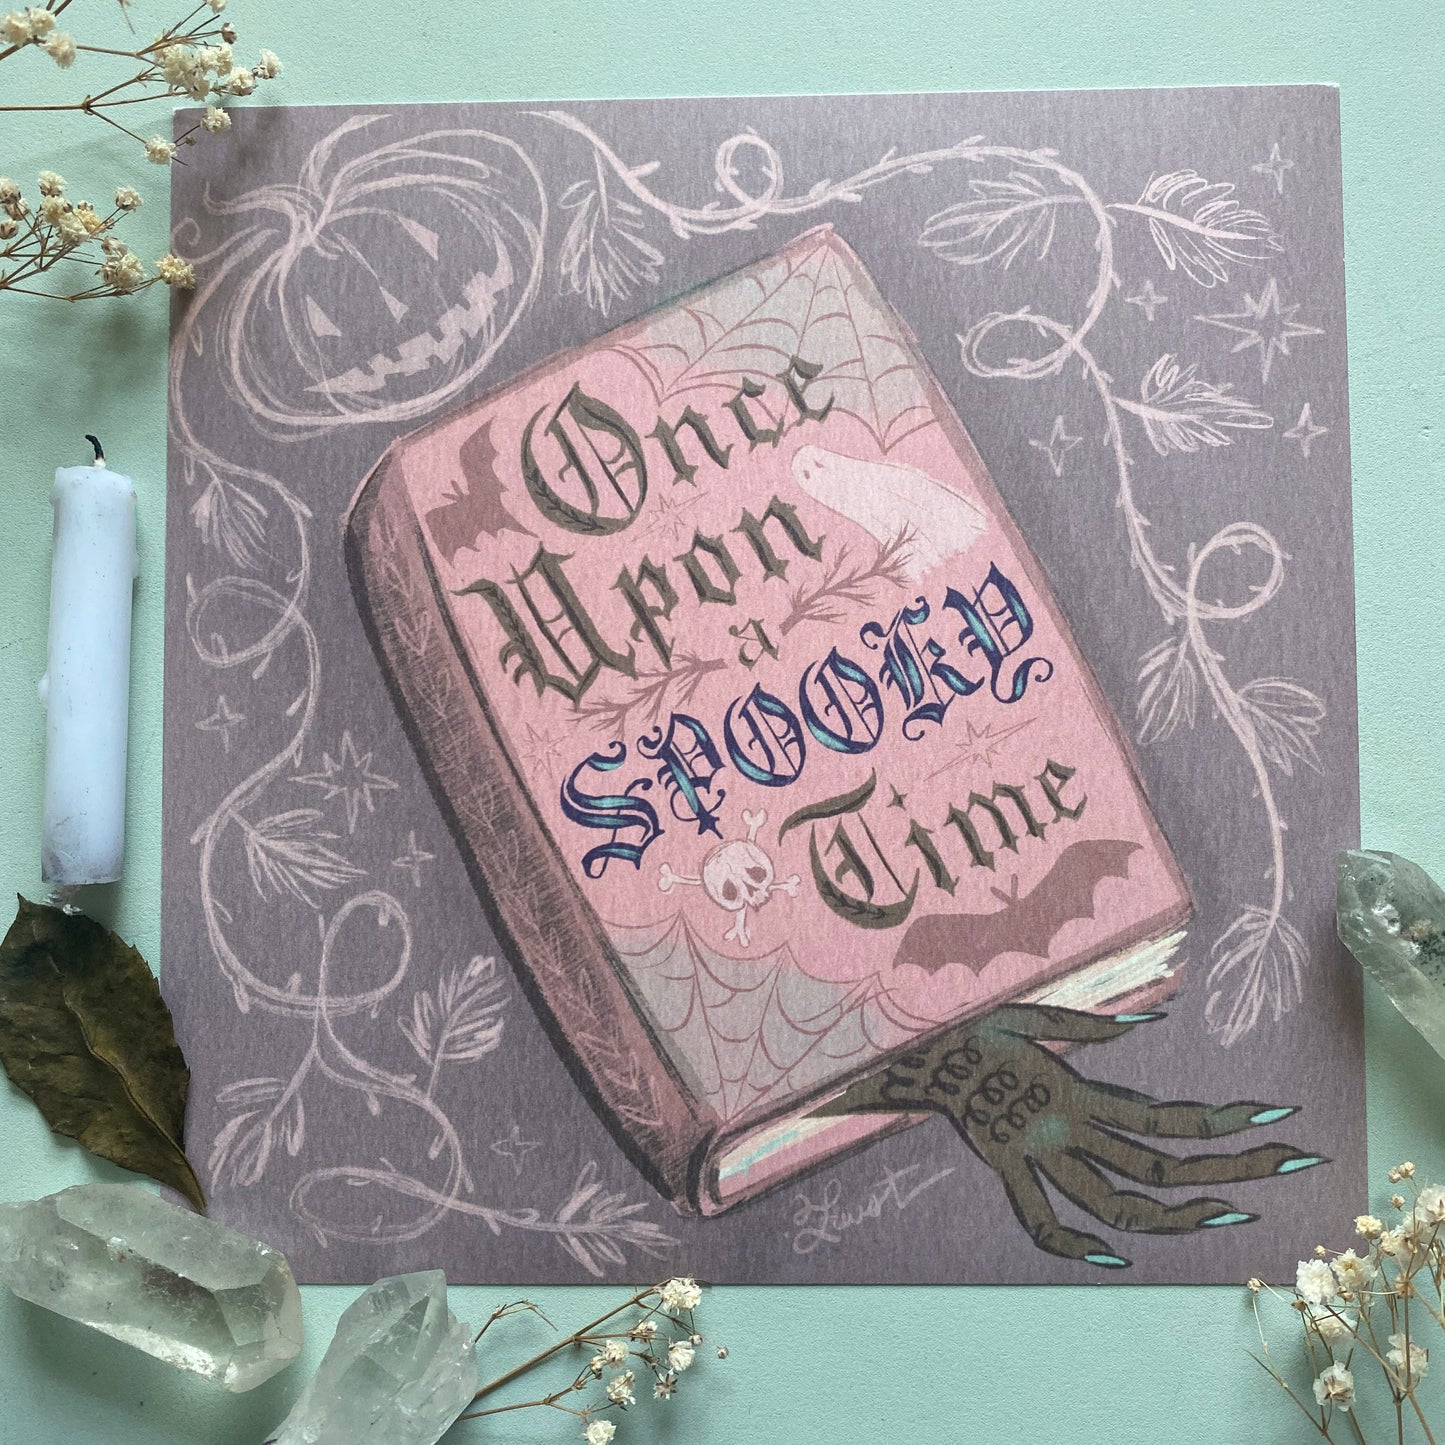 Once Upon a Spooky Time - 8x8 Art Print